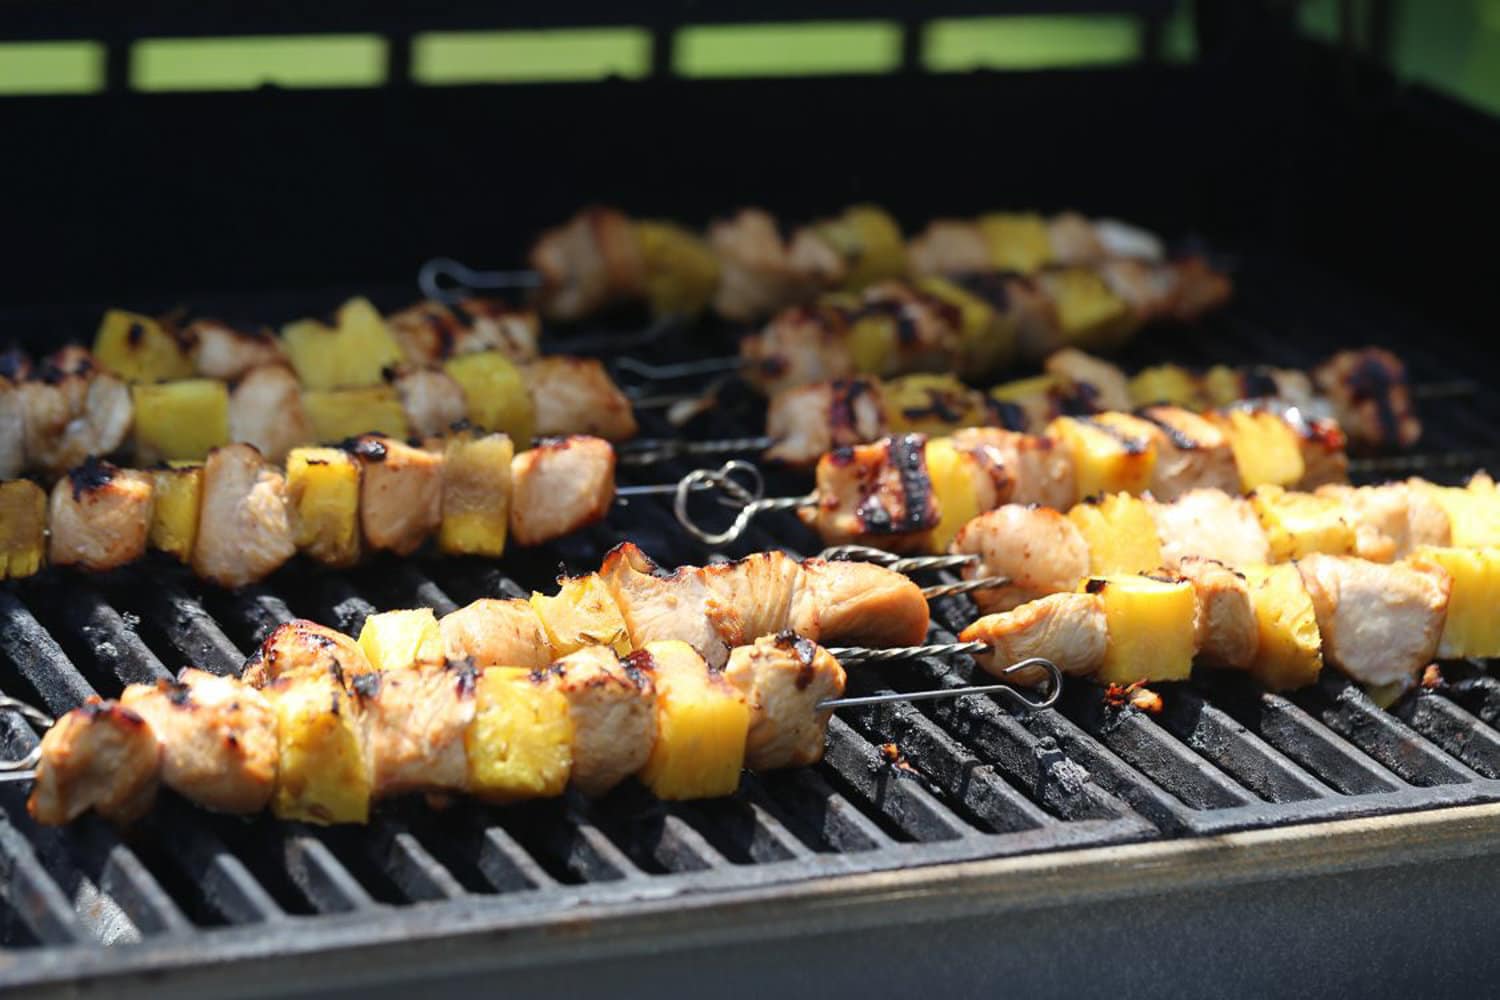 Pineapple ad chicken on the grill